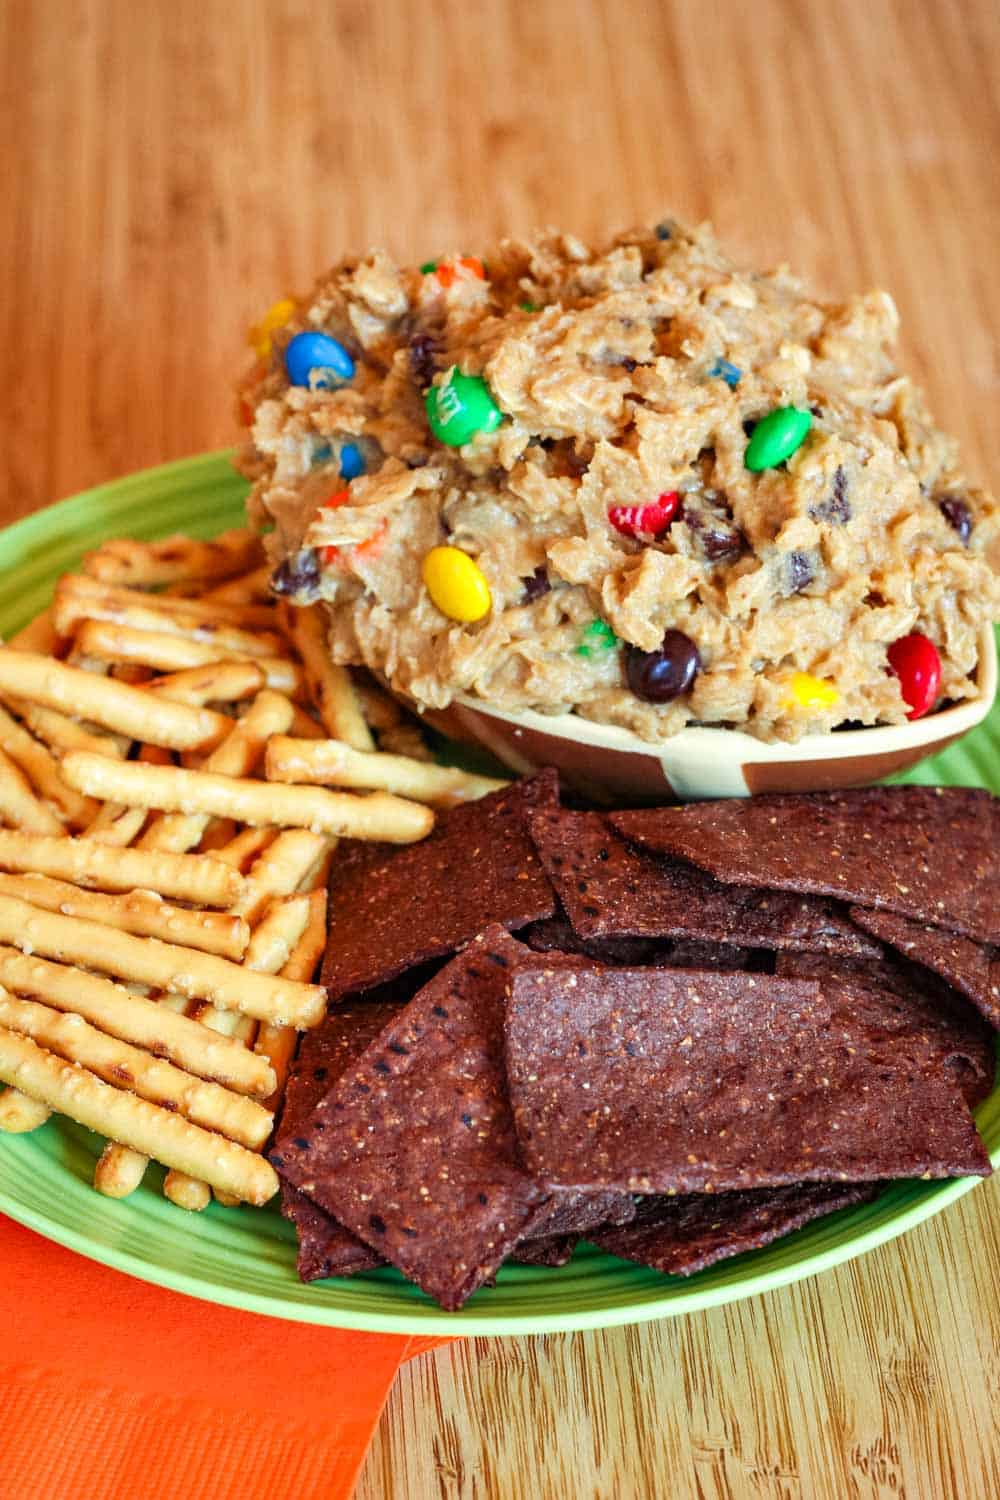 Chips and pretzels on a plate with a bowl of edible cookie dough with oats and M&M's.